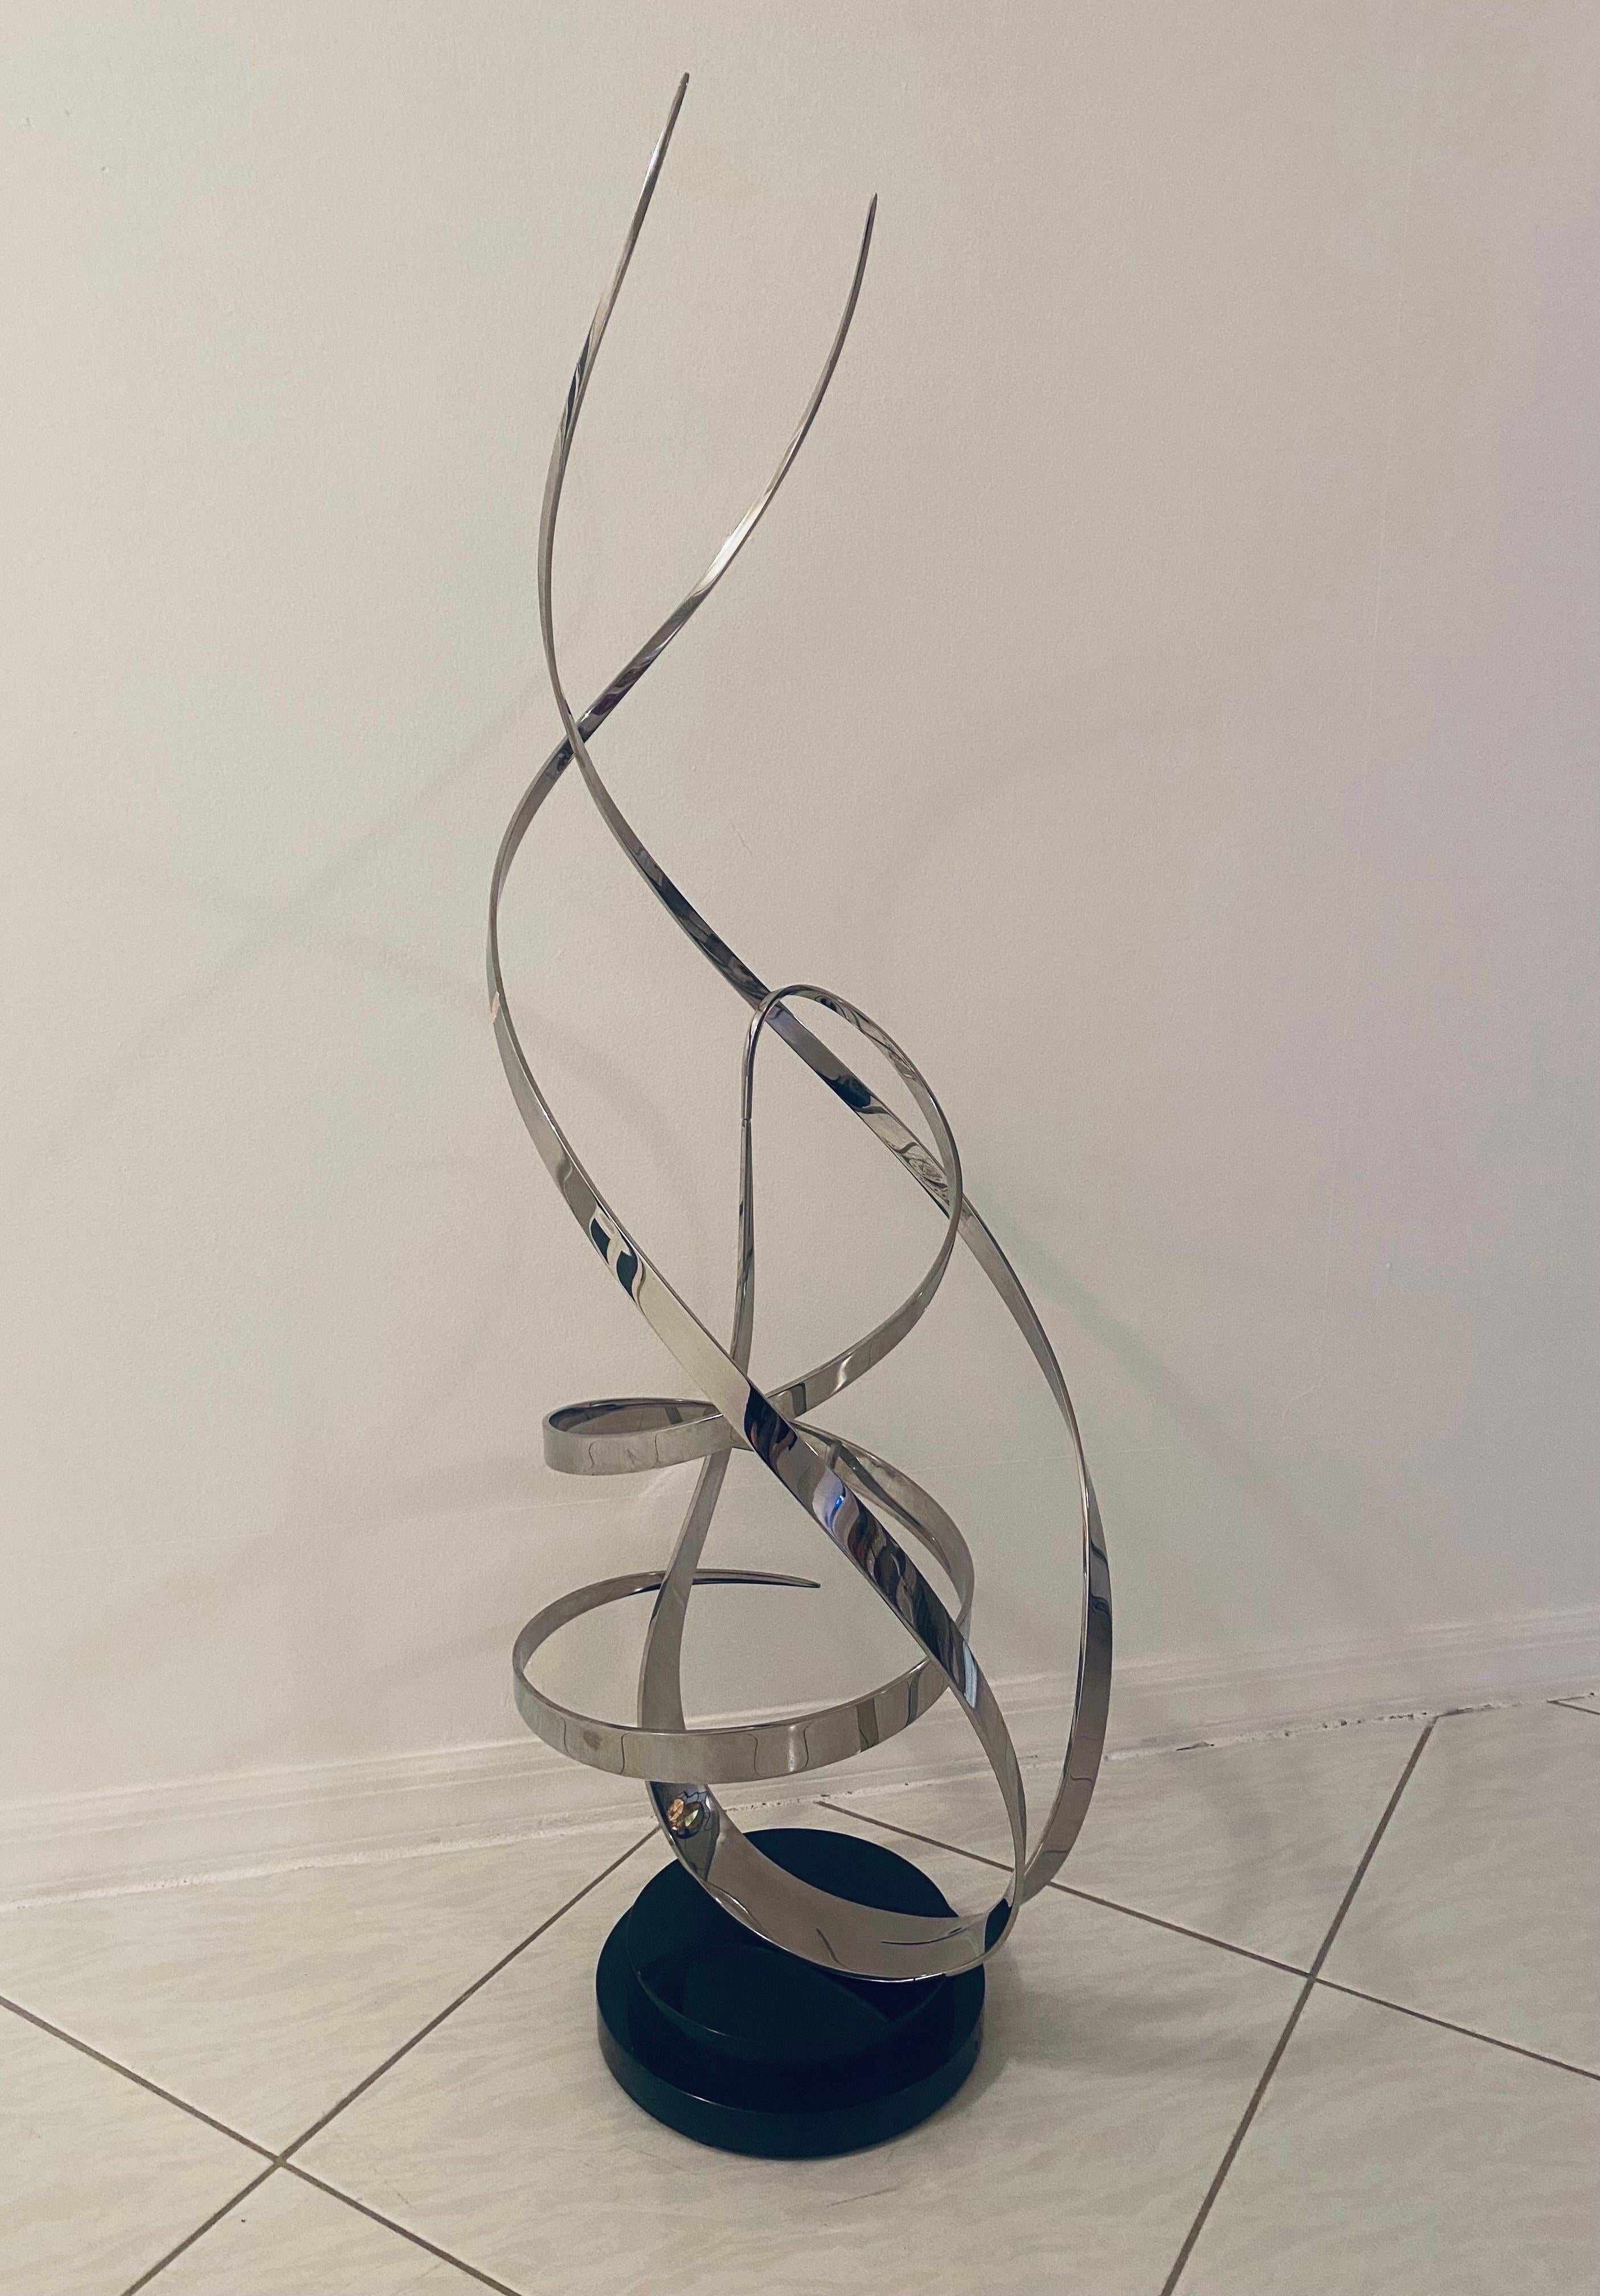 20th Century George Beckmann Kinetic Stainless Steel Sculpture